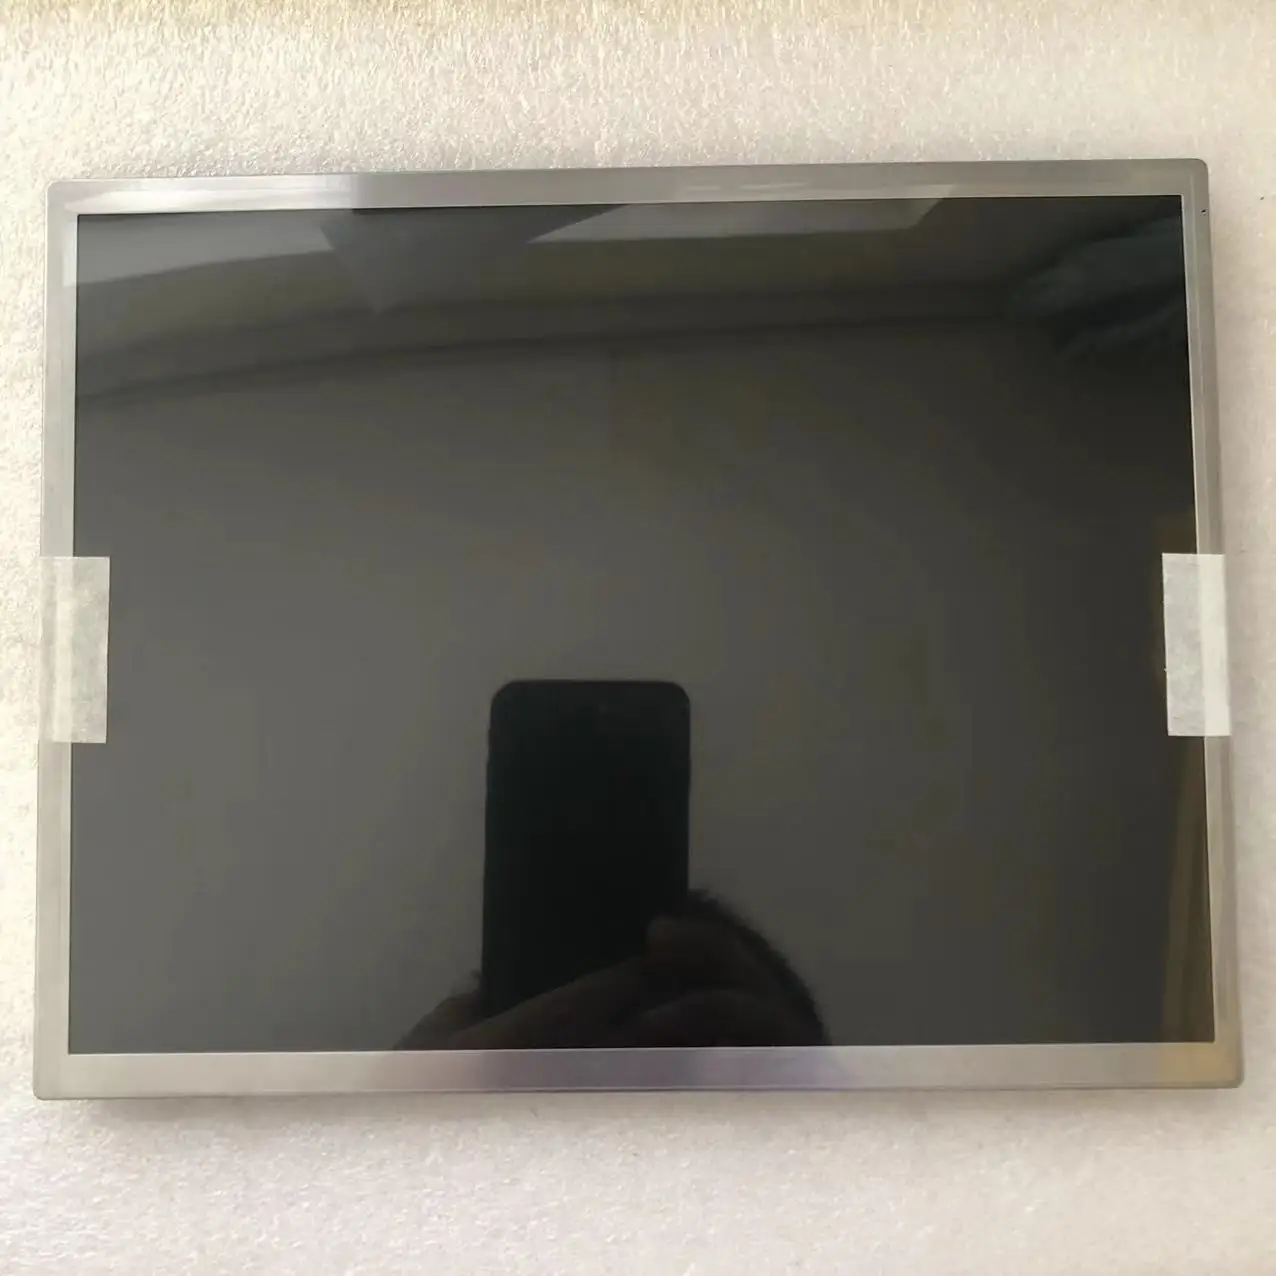 For 8.4-inch NL6448AC33-A1D LCD Screen Display Panel Fully Tested Before Shipment 5 inch pd050vl1 lcd screen display panel fully tested before shipment